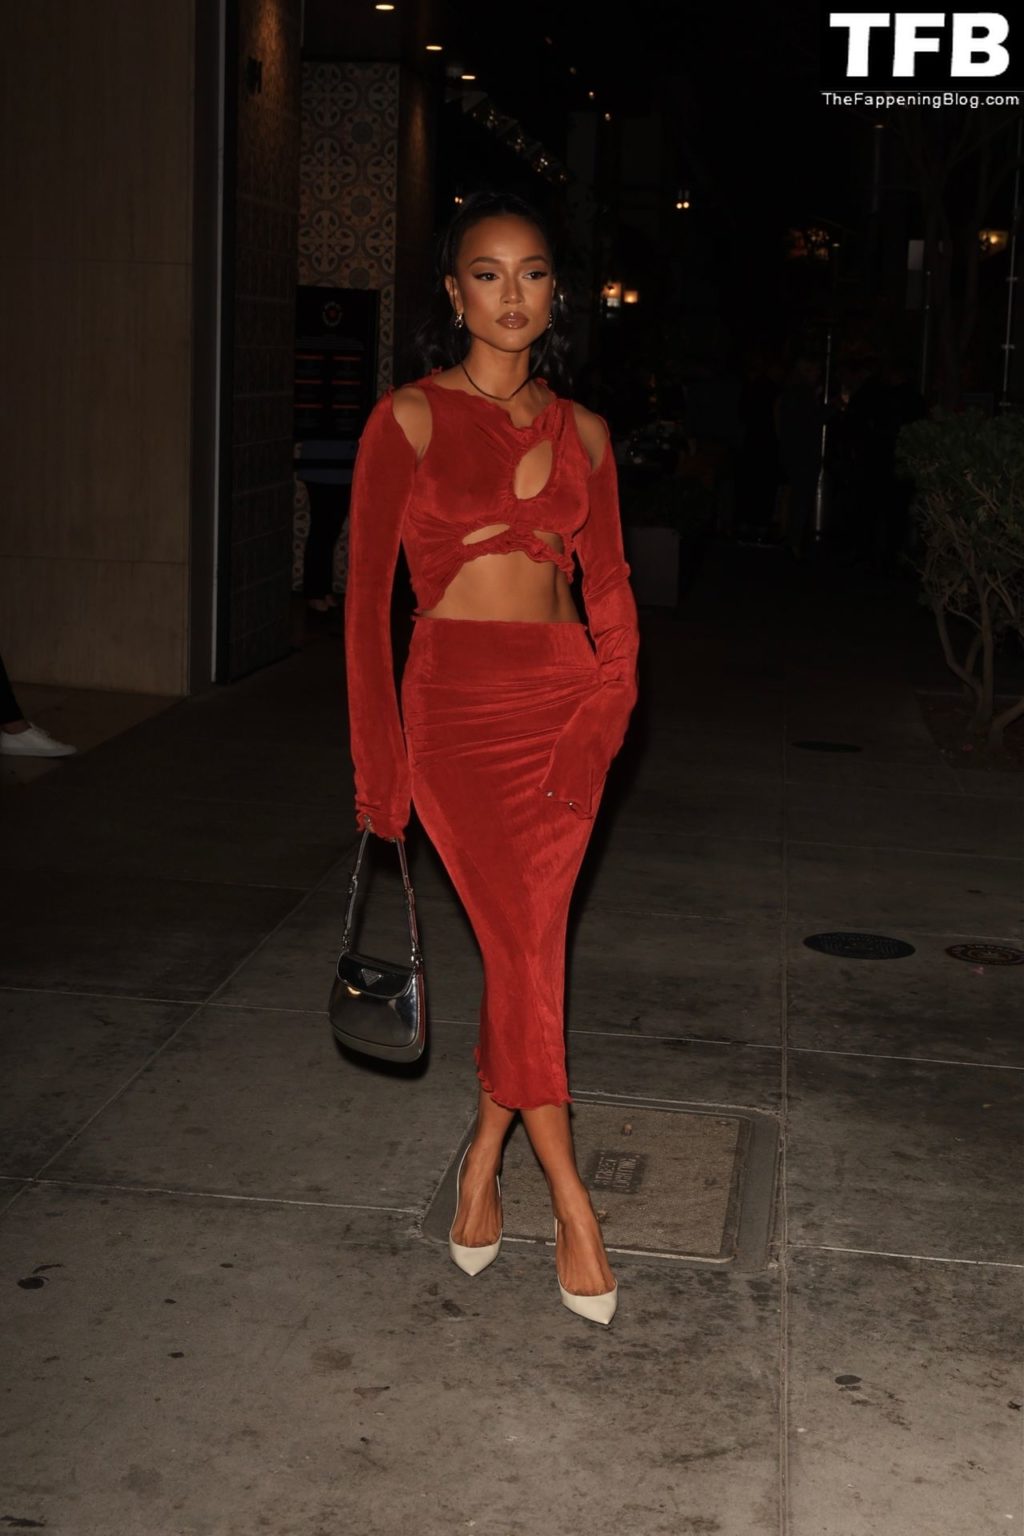 Karrueche Tran Sexy The Fappening Blog 28 1024x1536 - Karrueche Tran Shows Her Pokies in a Red Dress at The Hollywood Reporter’s Oscar Nominees Night (68 Photos)